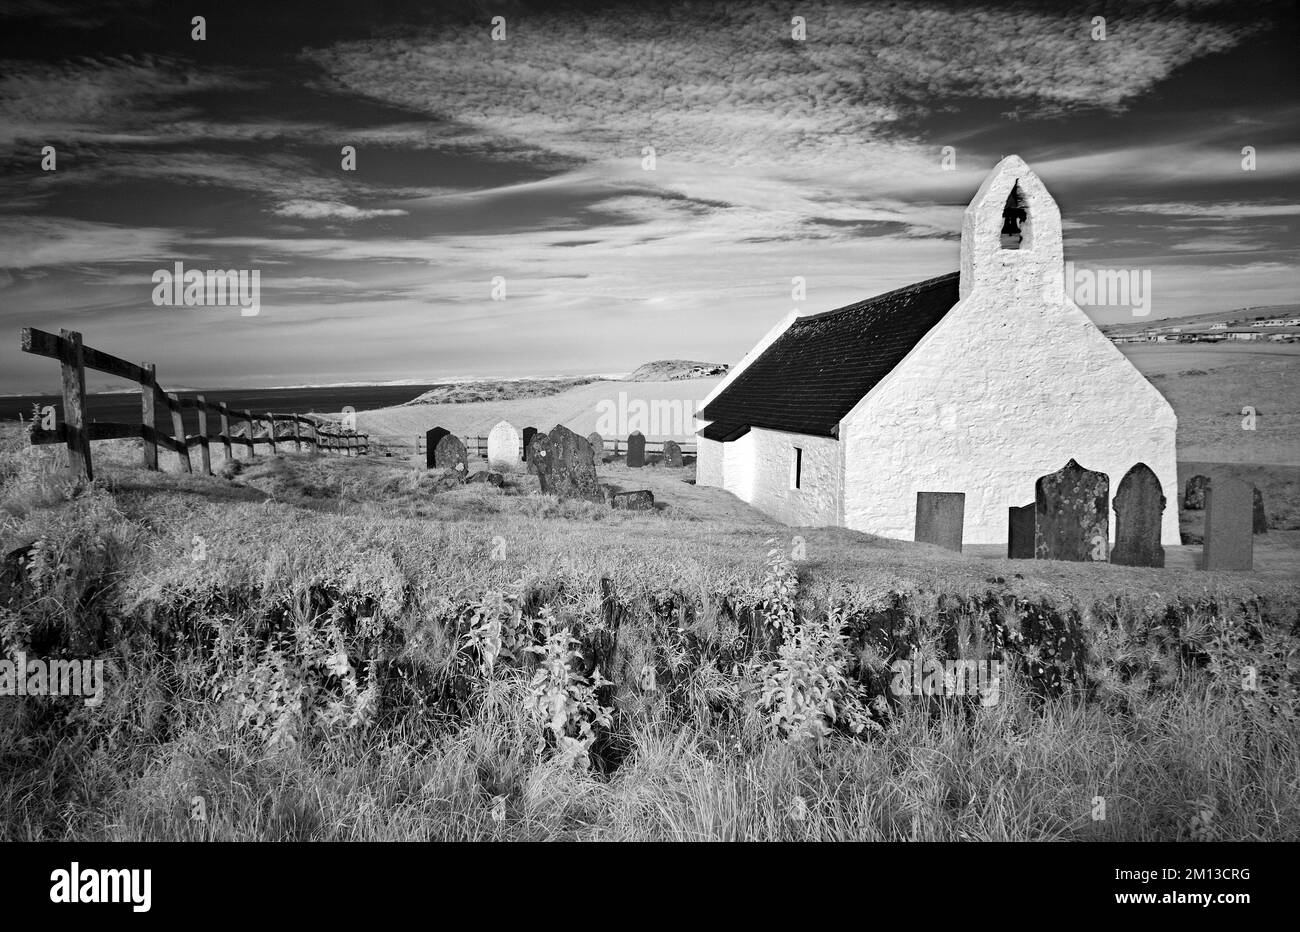 infrared landscape photograph of 6th century holycross church at Mwnt by the cardigan (ceredigion) coastal path  north ceredigion wales uk Stock Photo